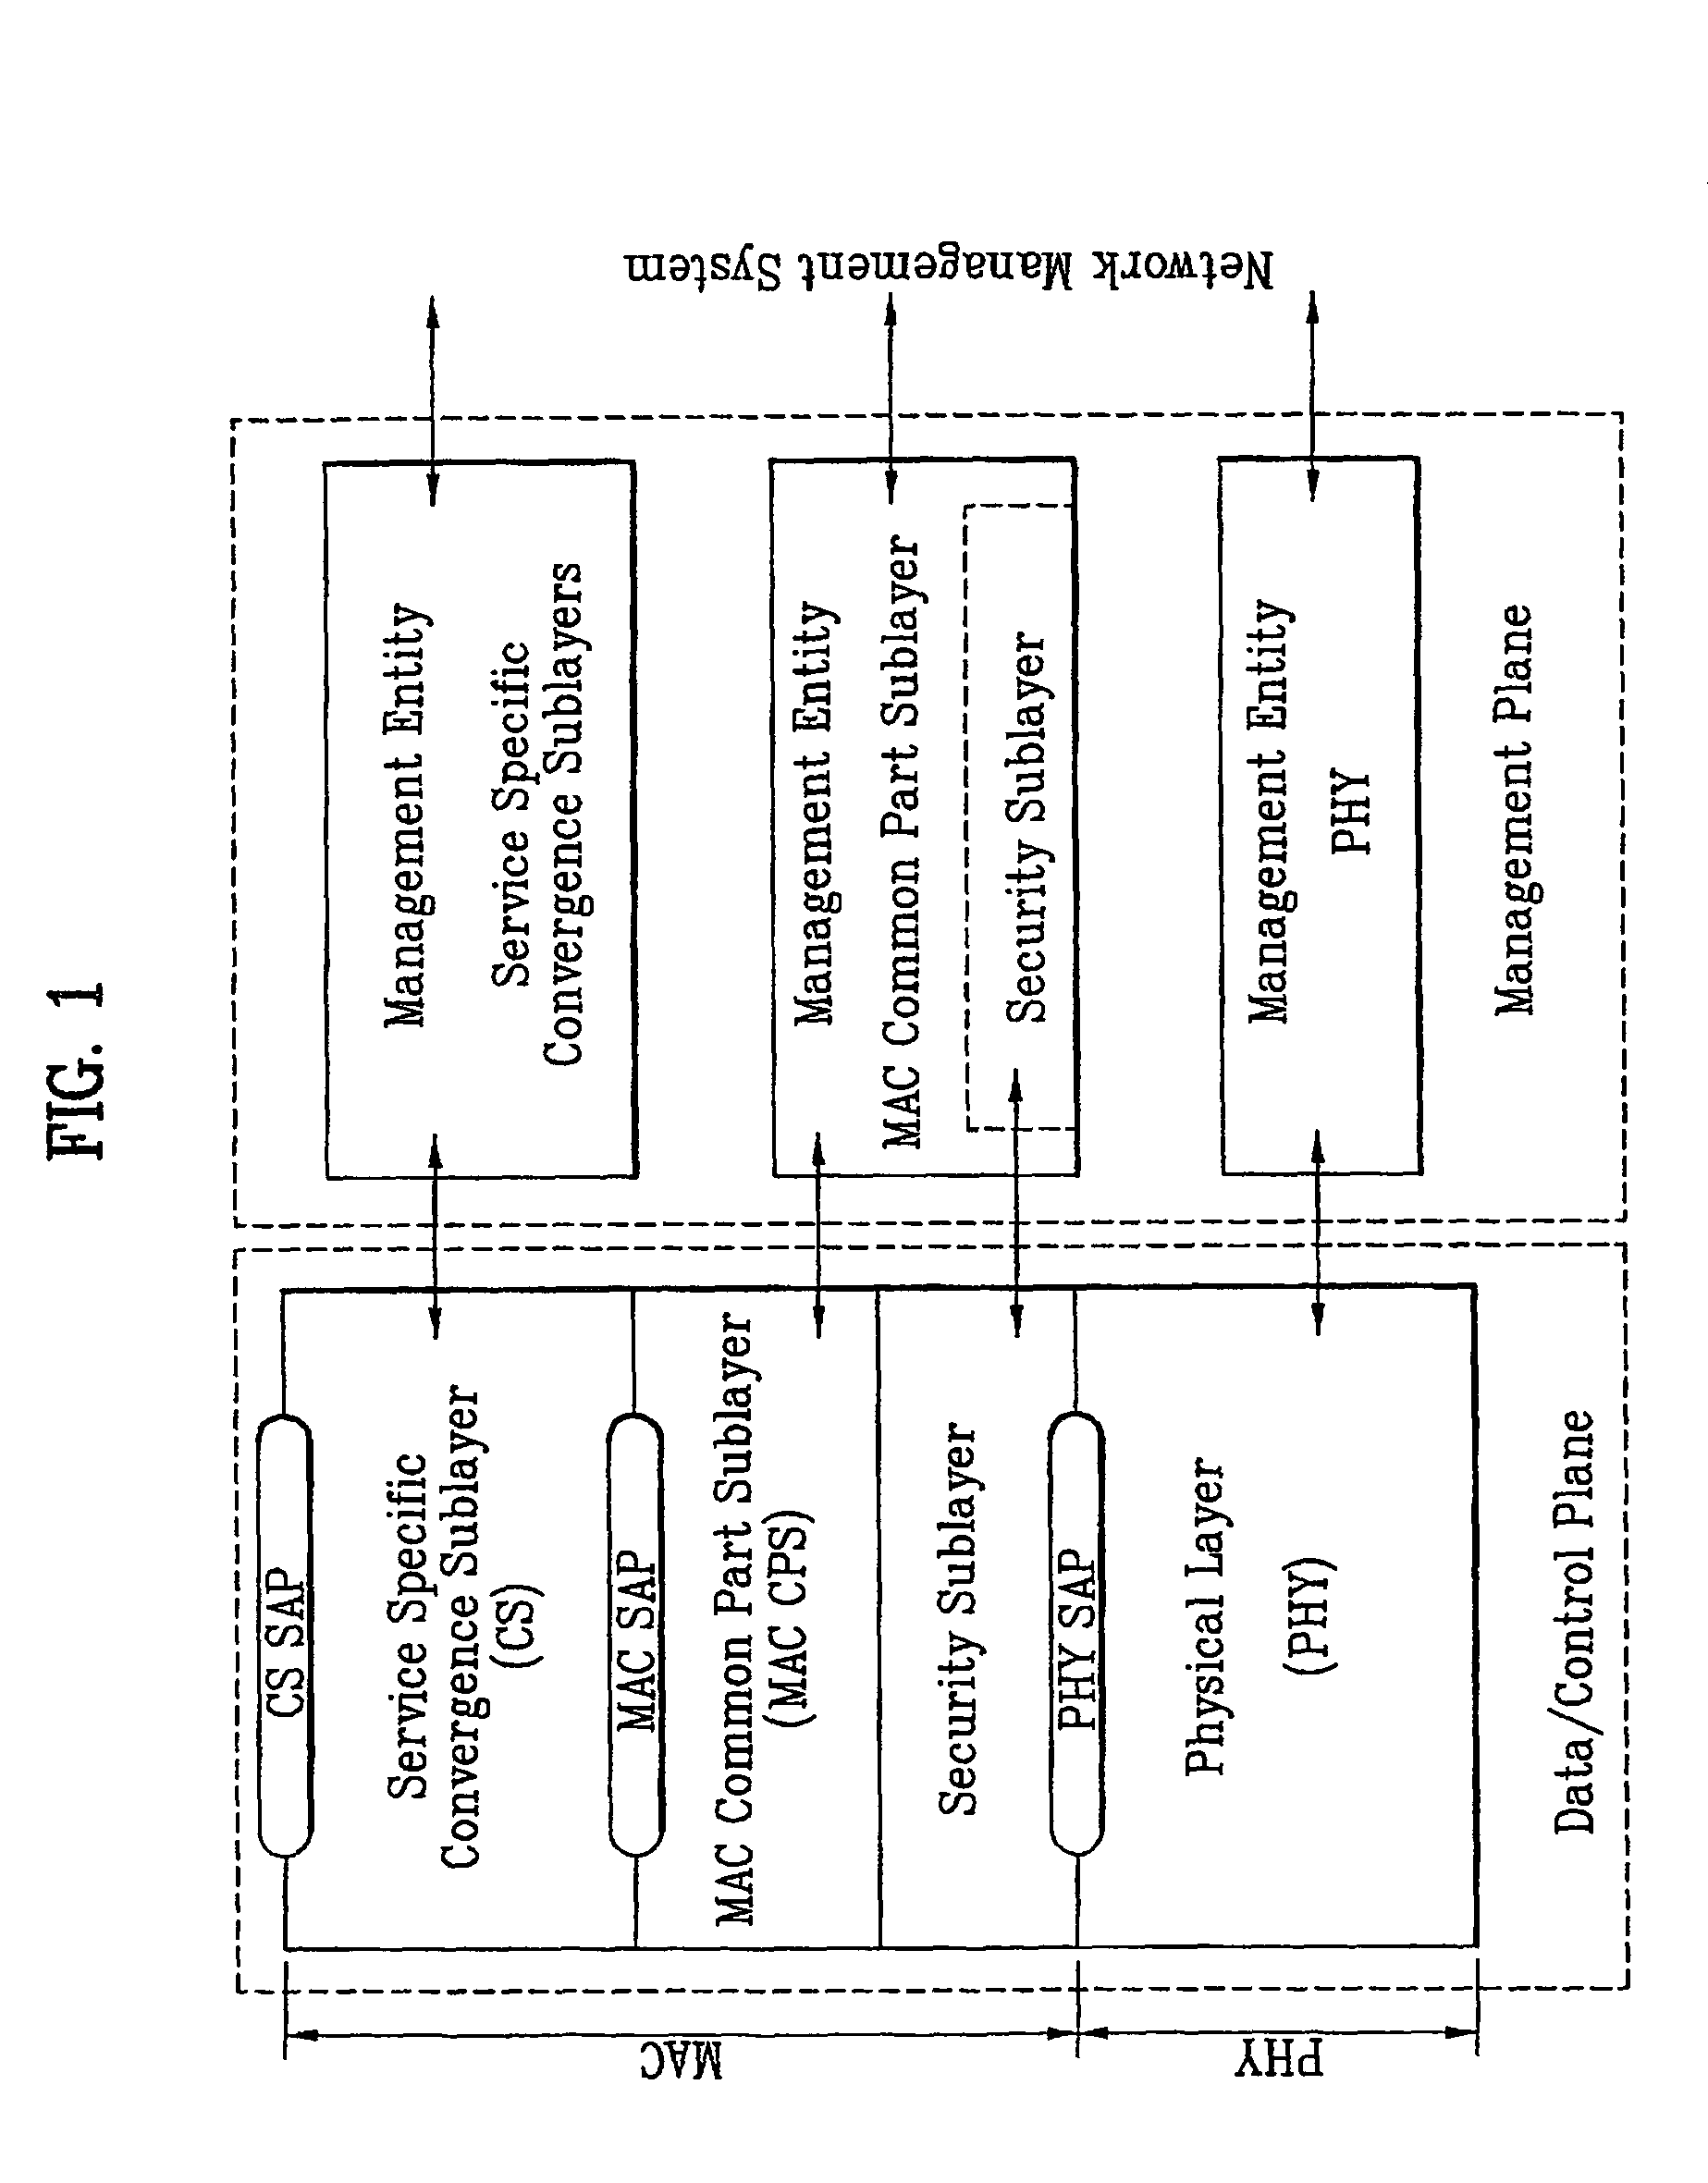 Notification of channel descriptor transmission for a mobile station in idle or sleep mode in a wireless access system